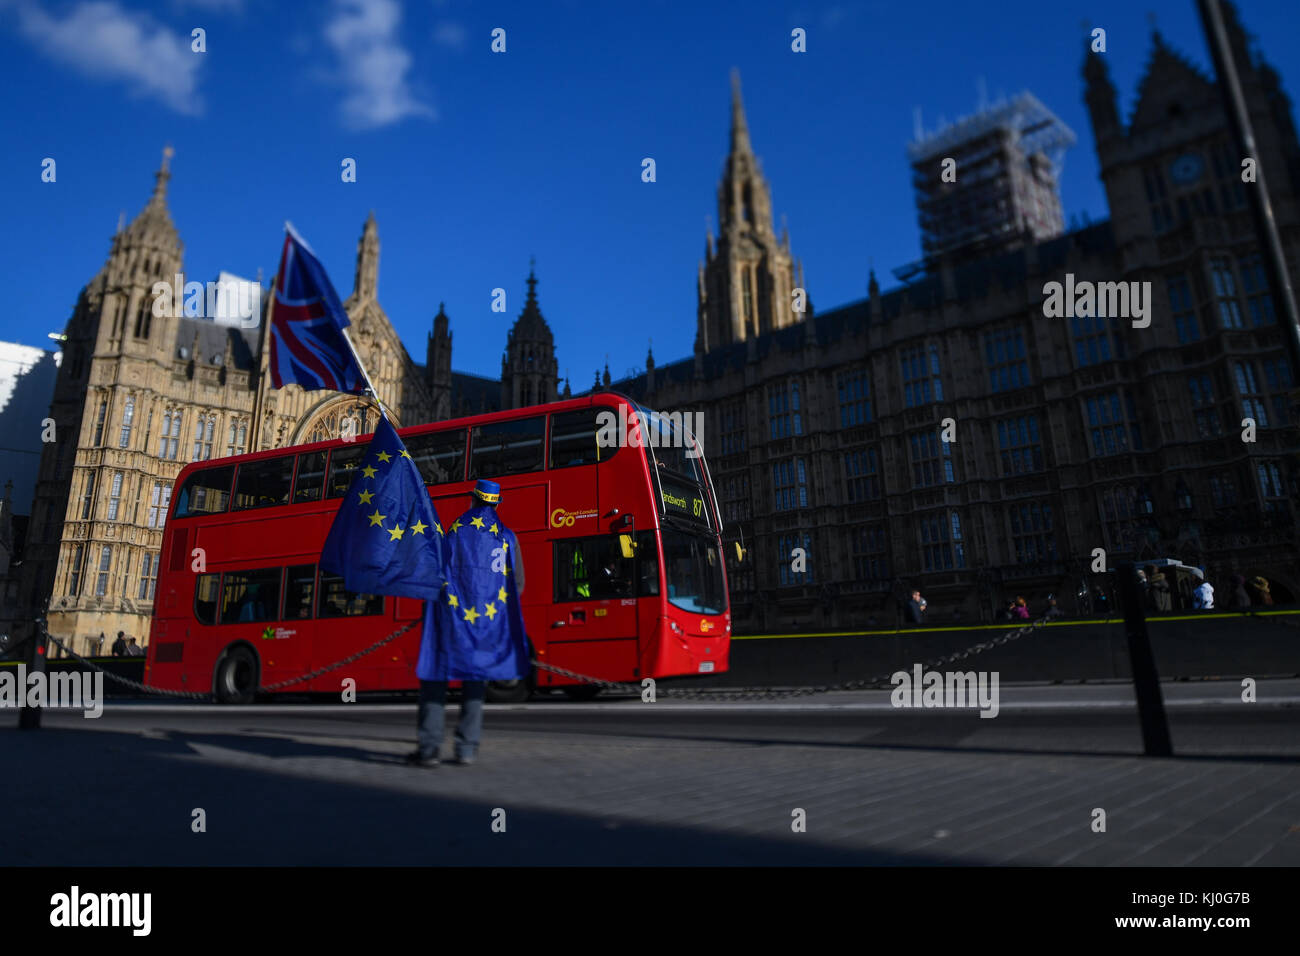 A lone Brexit protester continues his one man stand against the Brexit vote outcome outside the Houses of Parliament London. Stock Photo